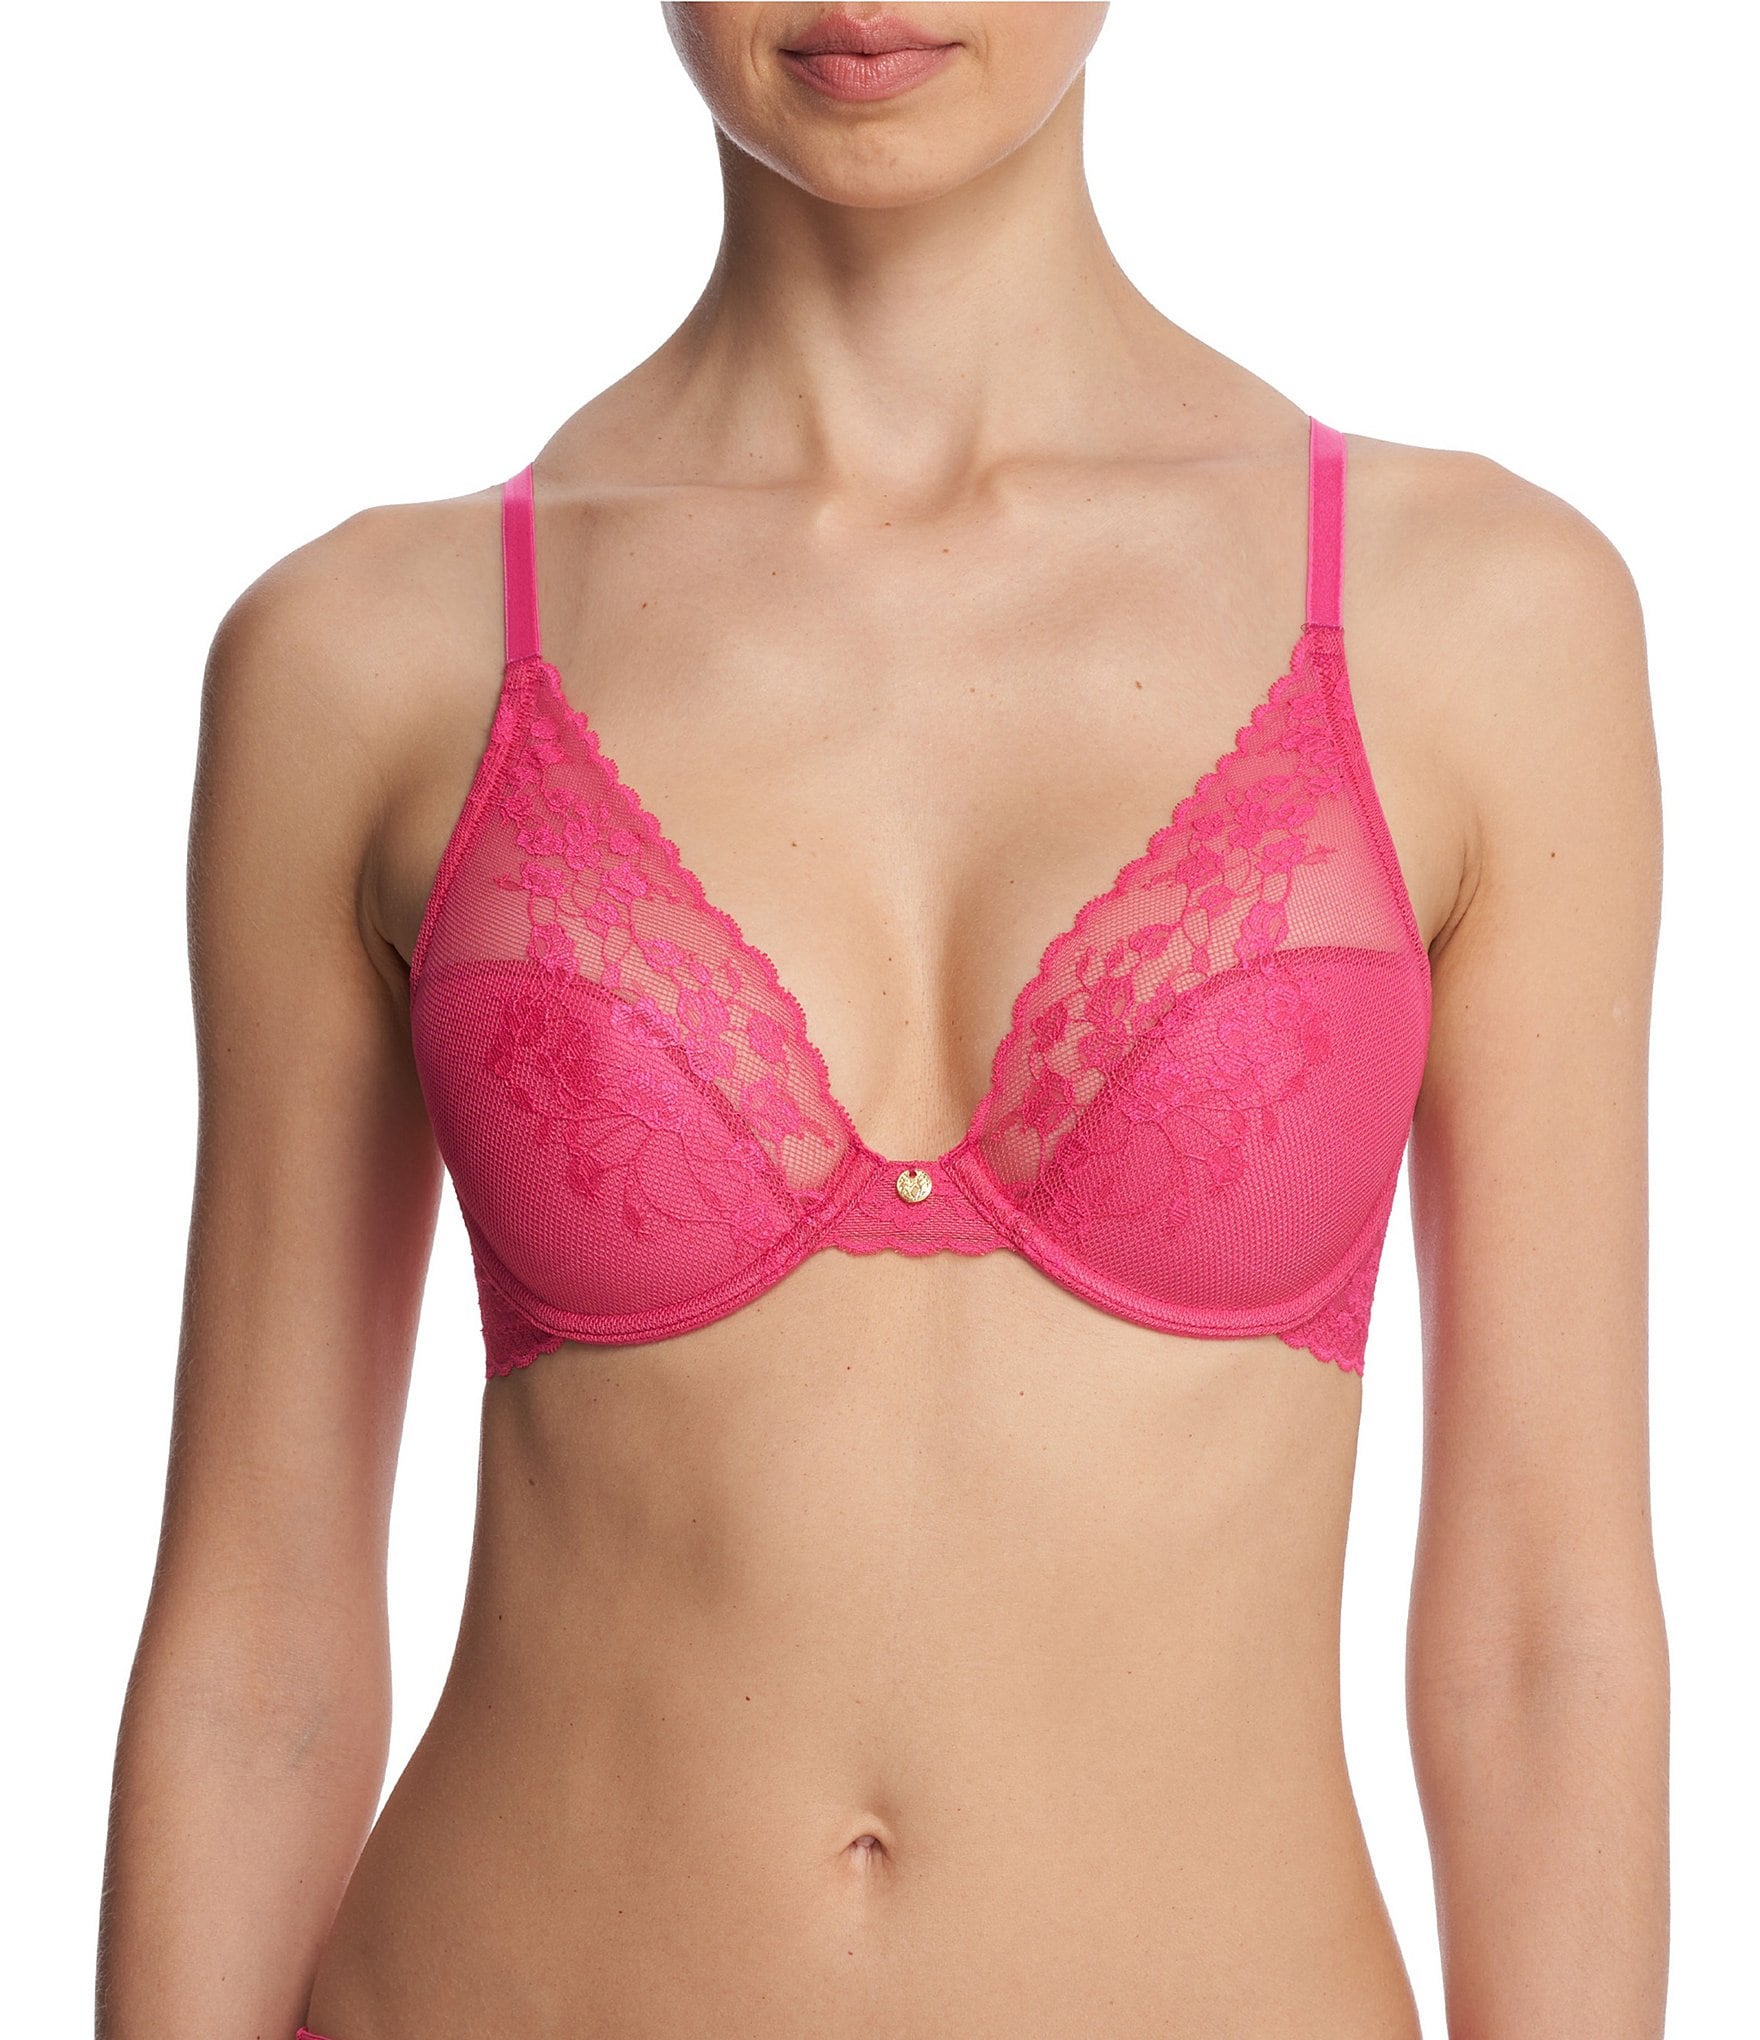 Is cup size ok? Breasts look rather far apart. 32C - Natori